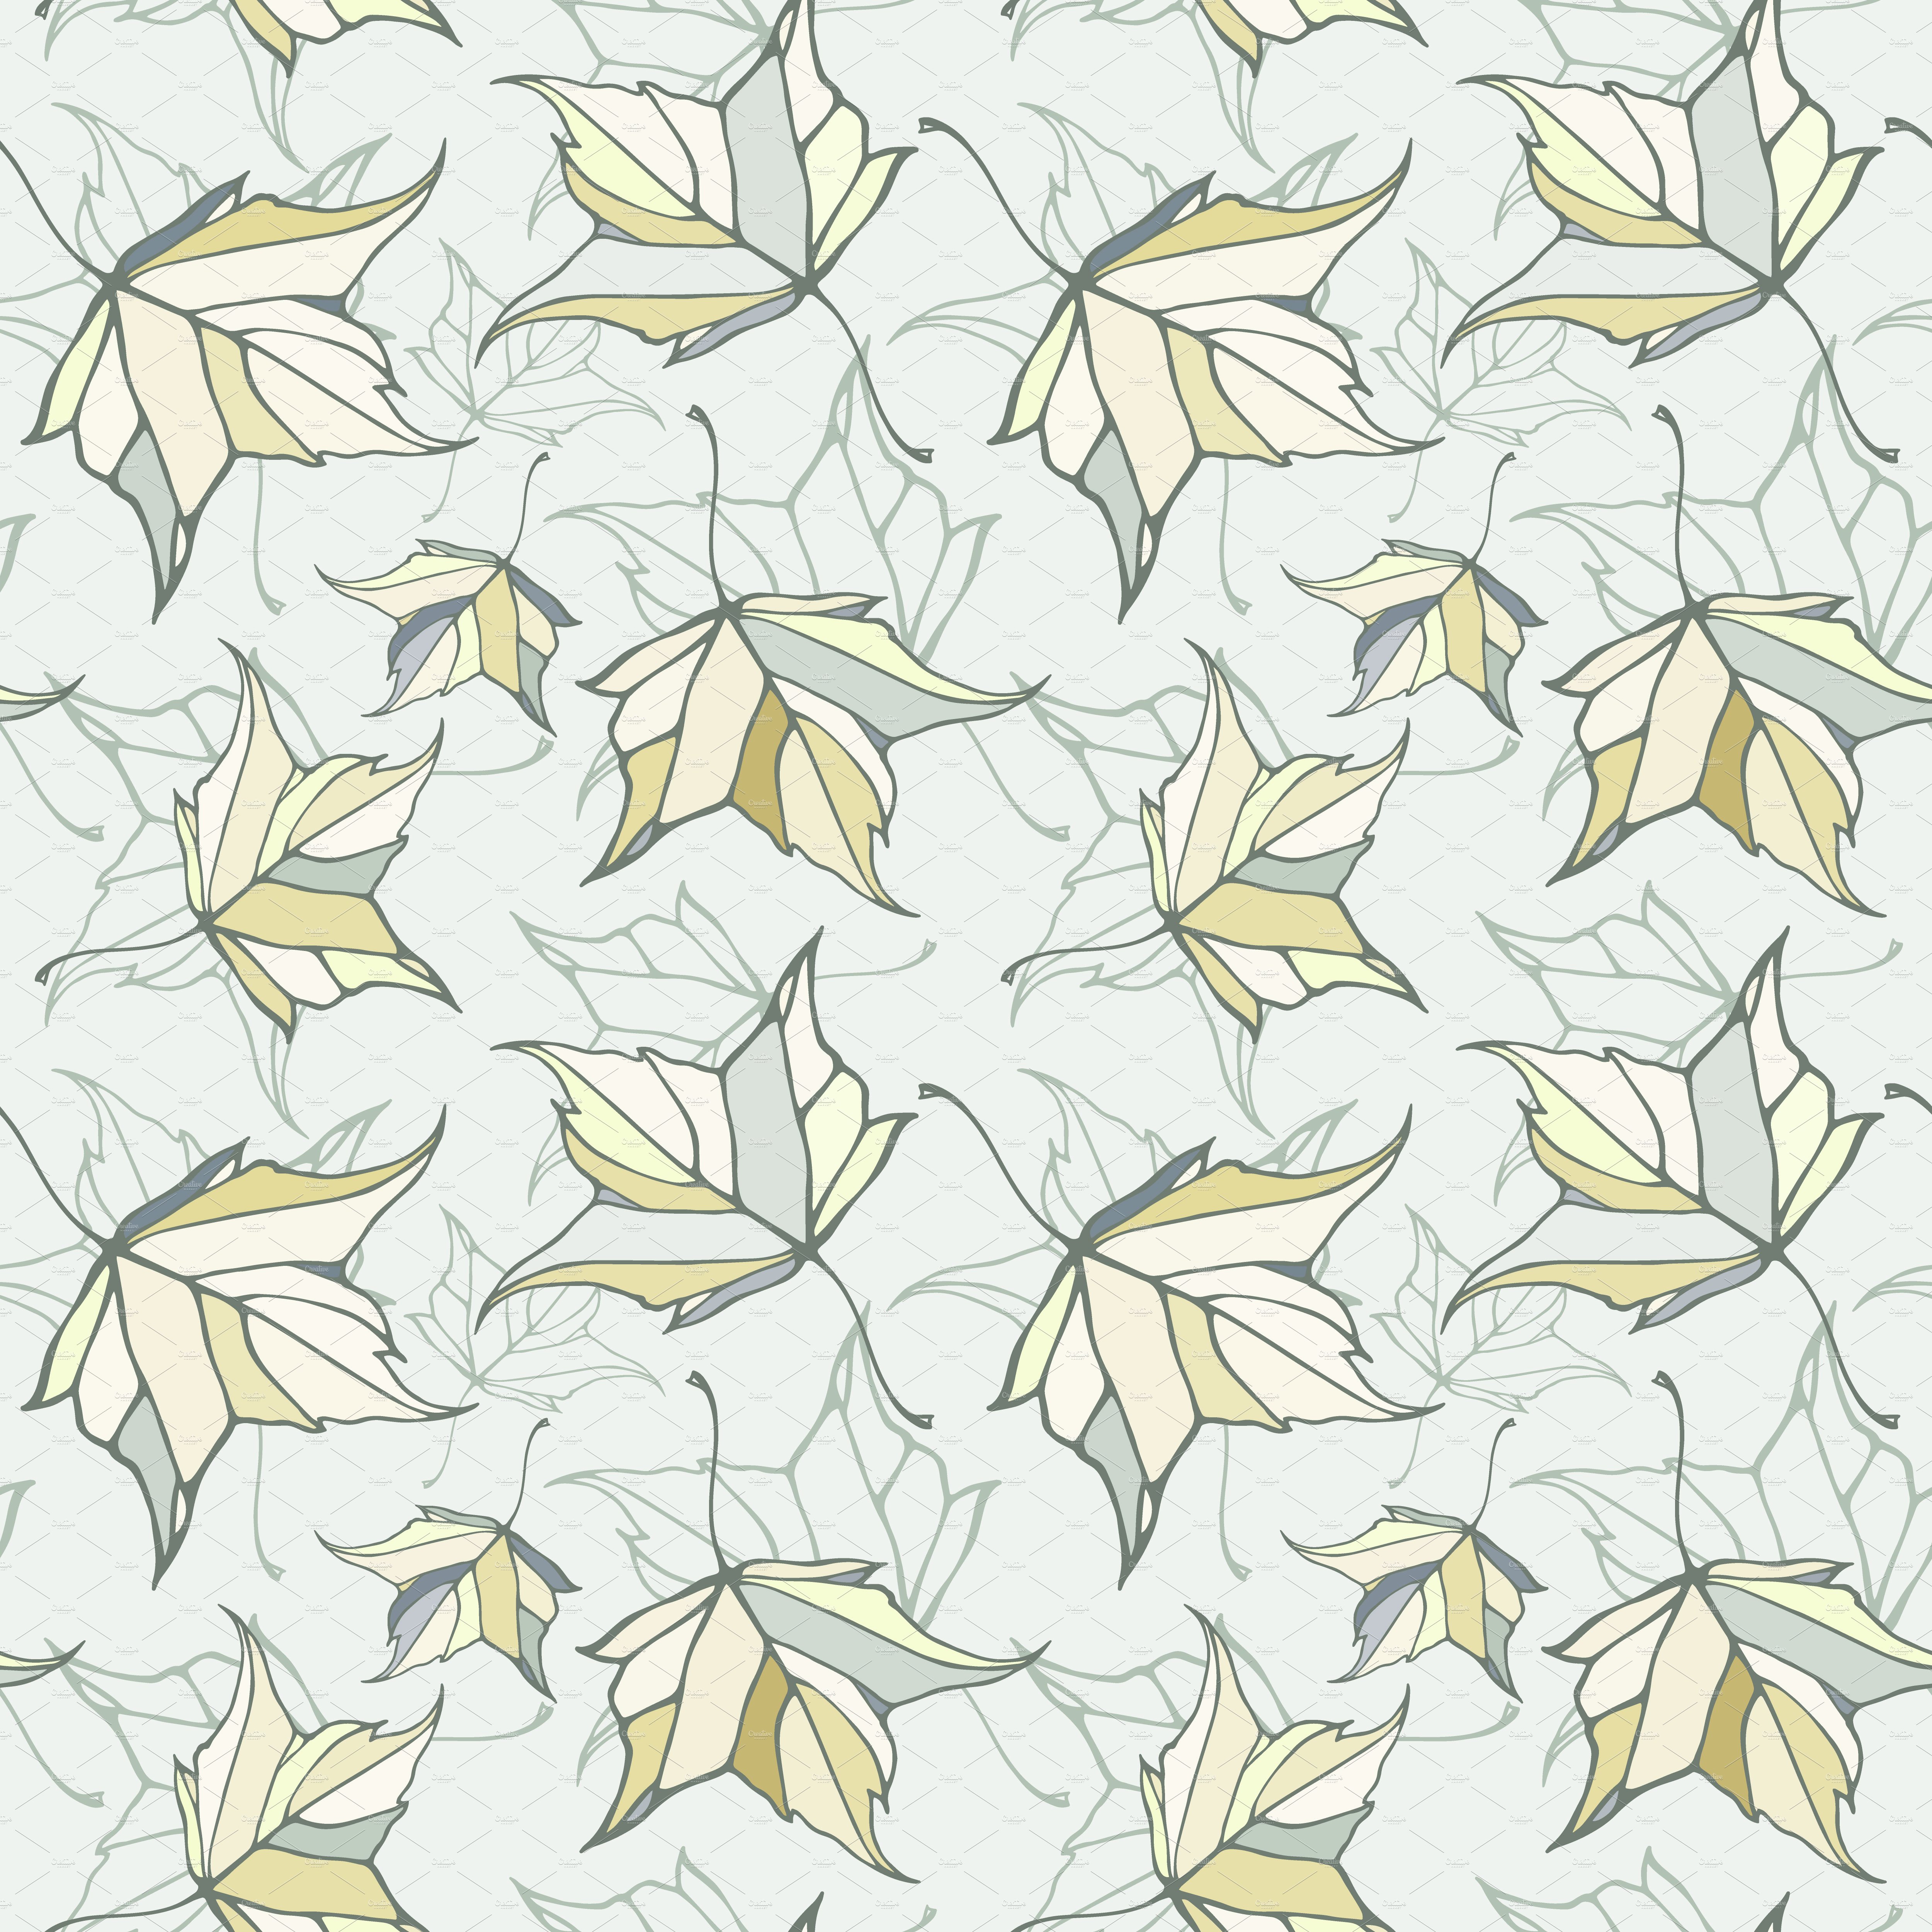 Pattern of yellow leaves on a white background.